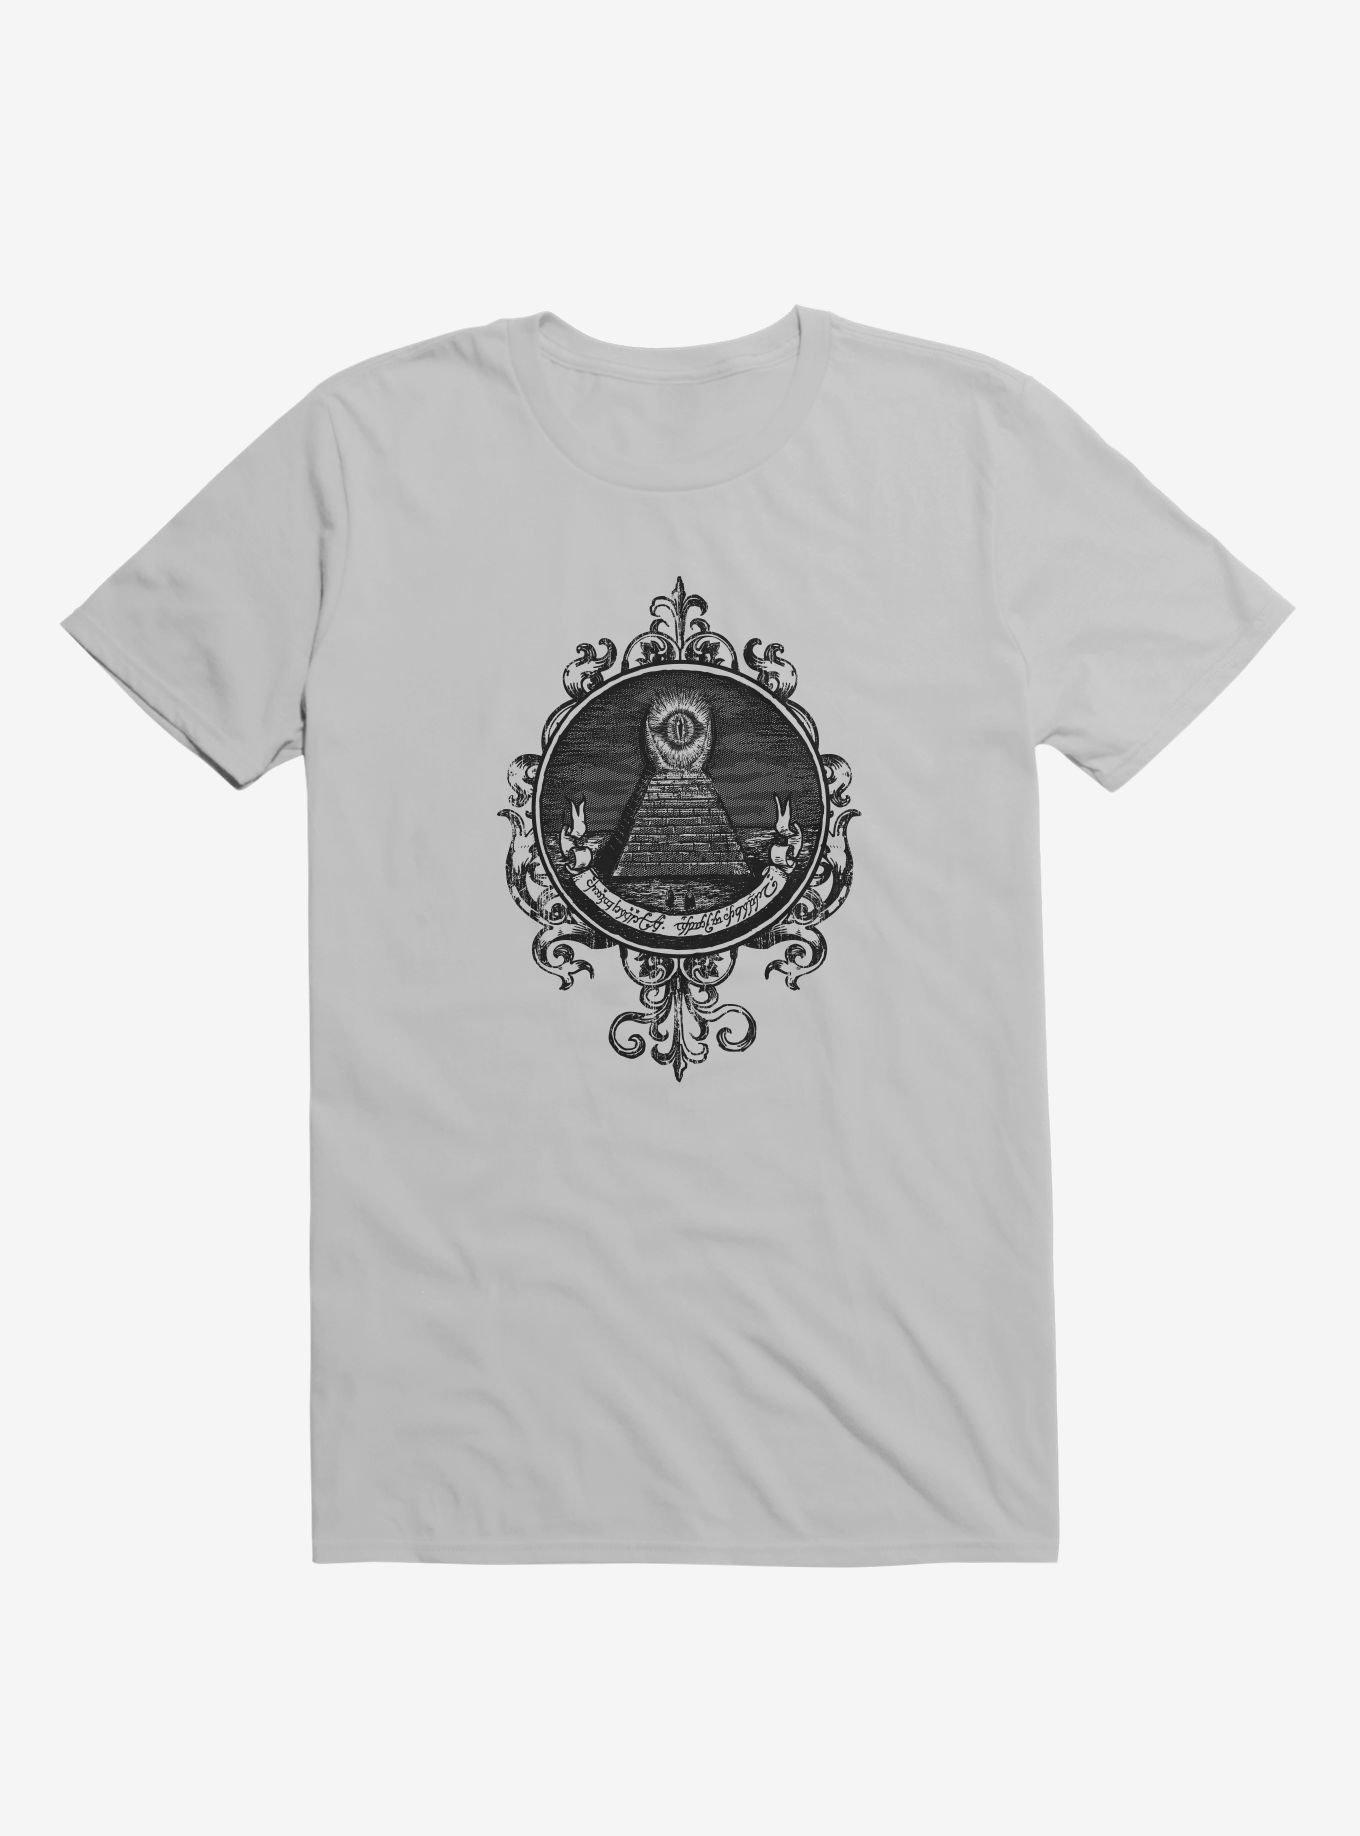 The All Seeing Eye T-Shirt